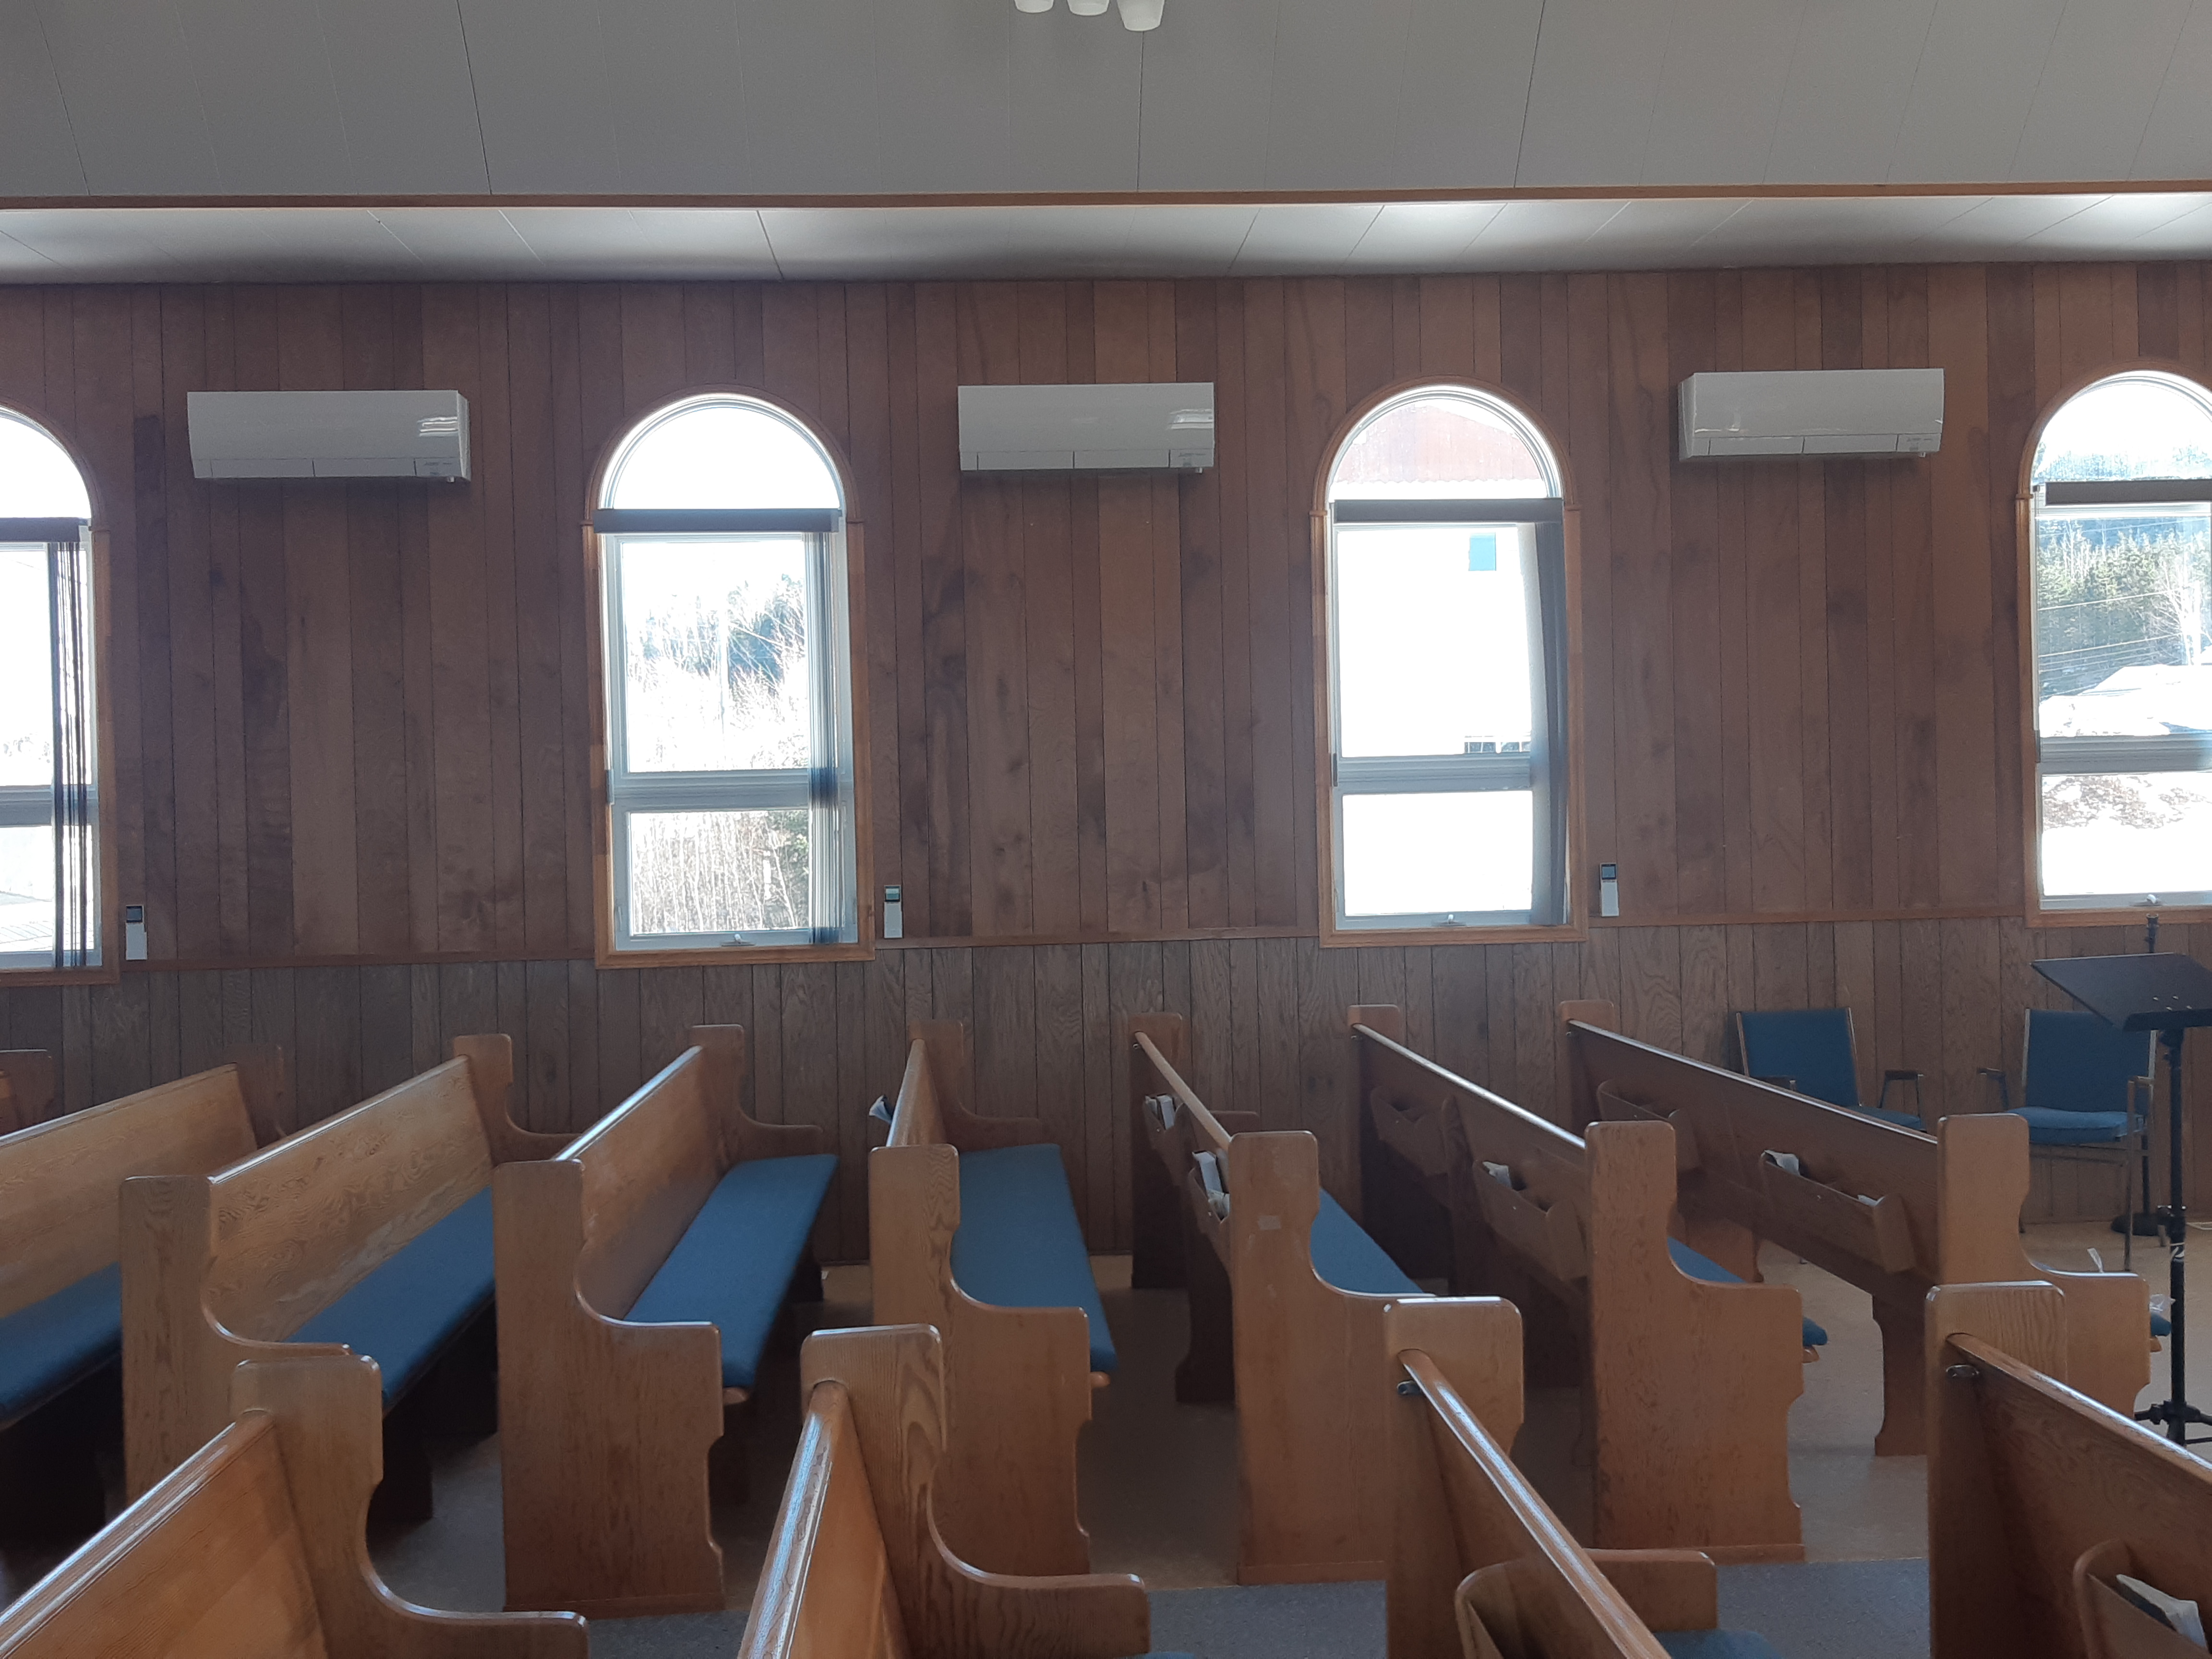 the hall of a church with heat pumps on the walls